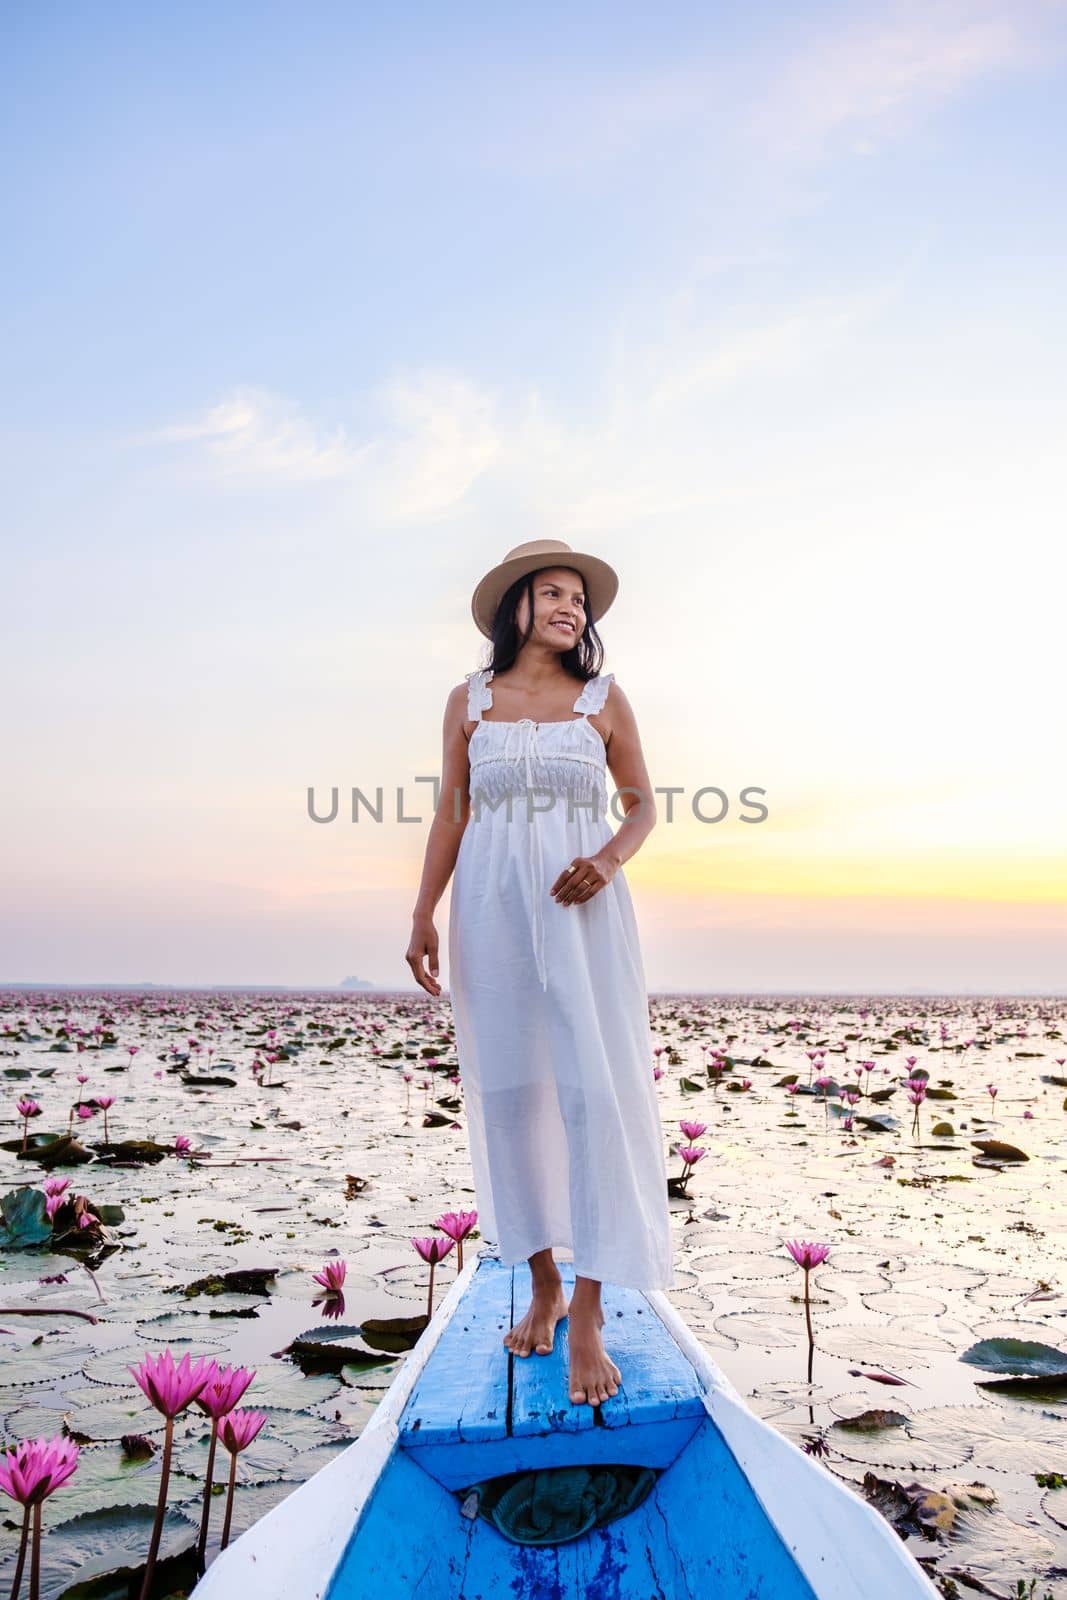 Asian women in a boat at the Red Lotus Sea Kumphawapi full of pink flowers in Udon Thani Thailand. by fokkebok